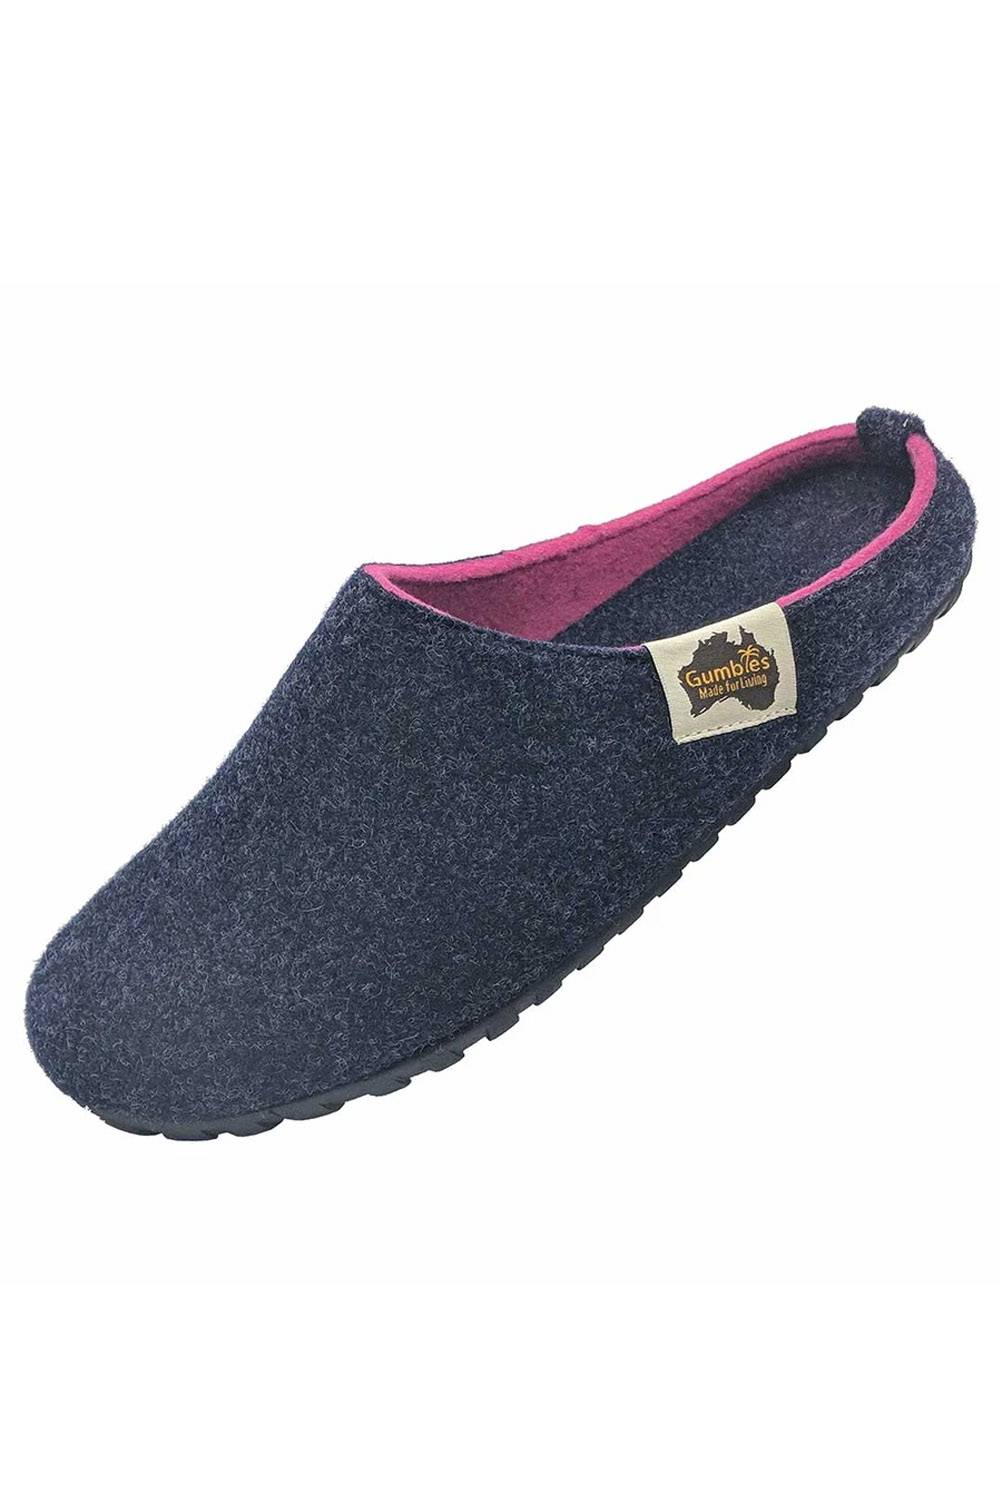 gumbies affordable ethical recycled slippers